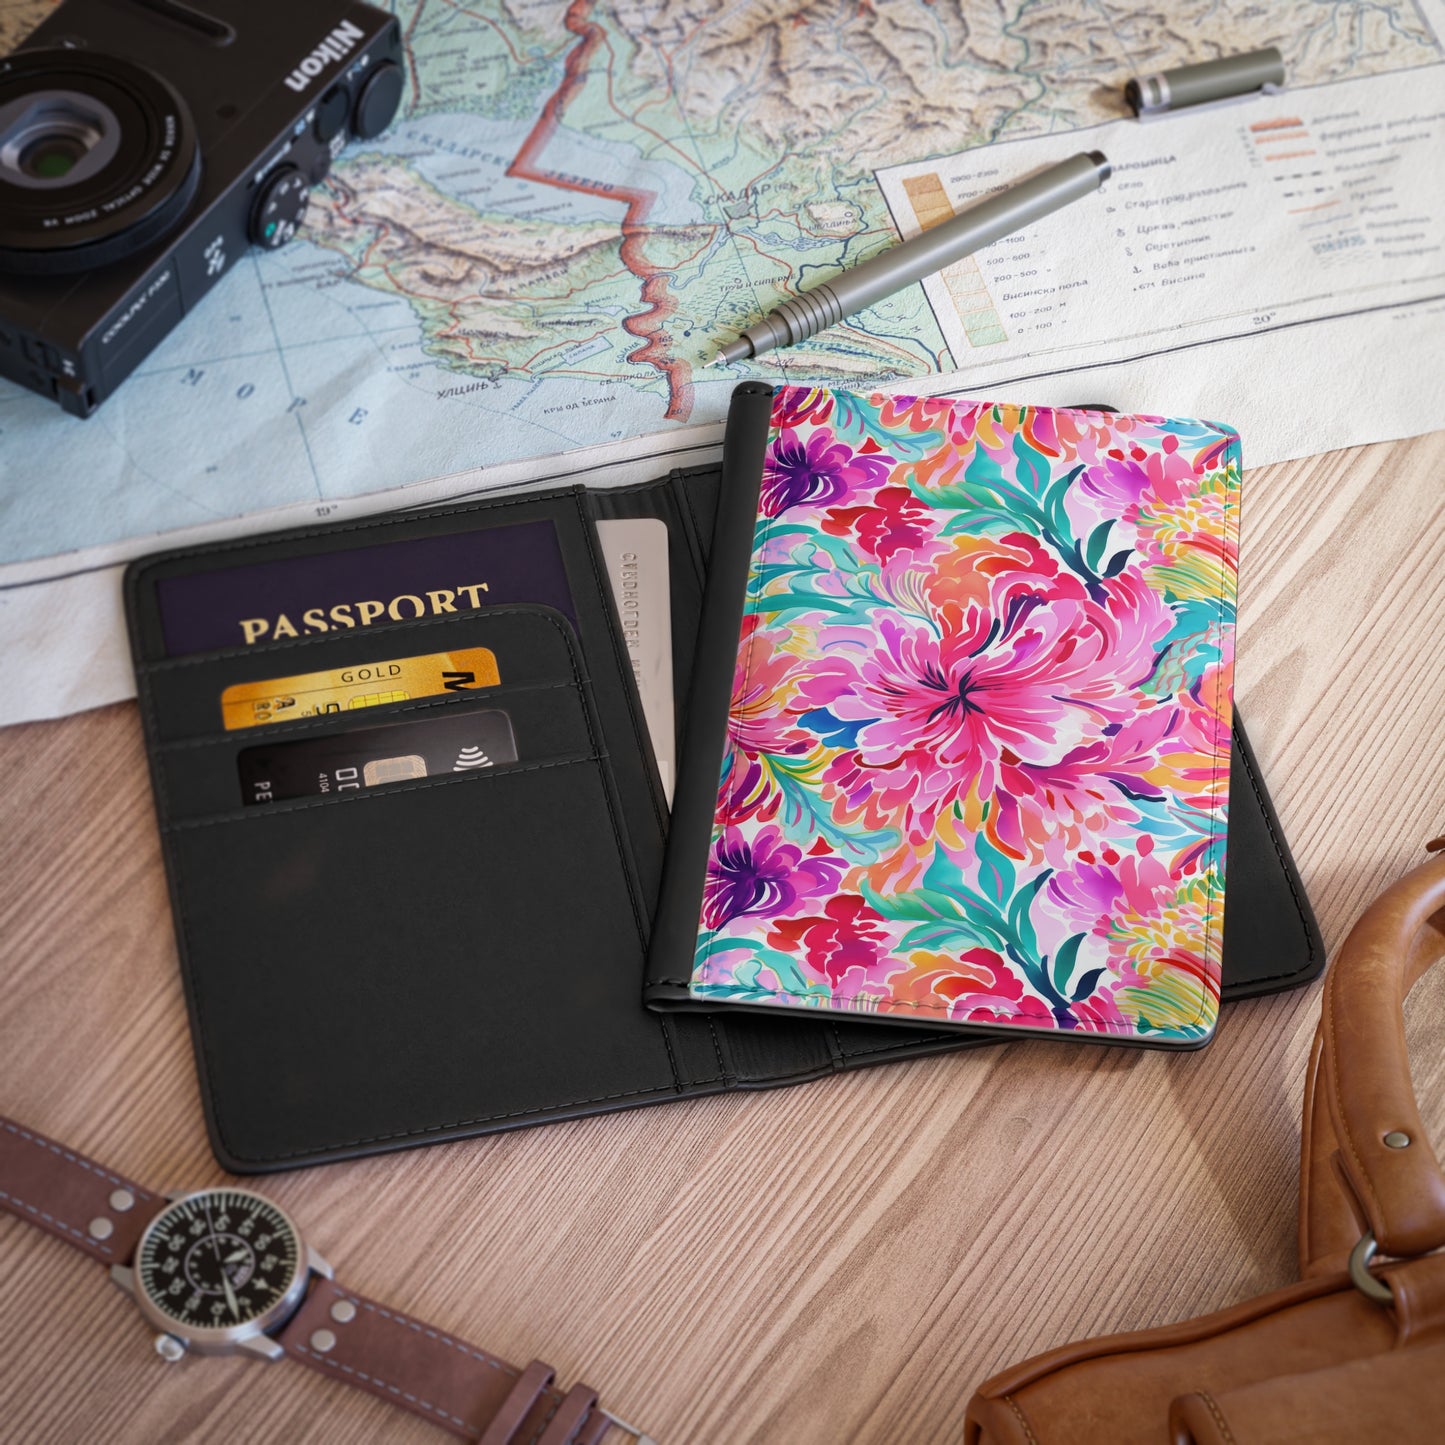 Rainbow Tropics: Watercolor Flowers in Vibrant Pink, Green and Orange Hues - Passport Cover Faux Leather RFID Blocking